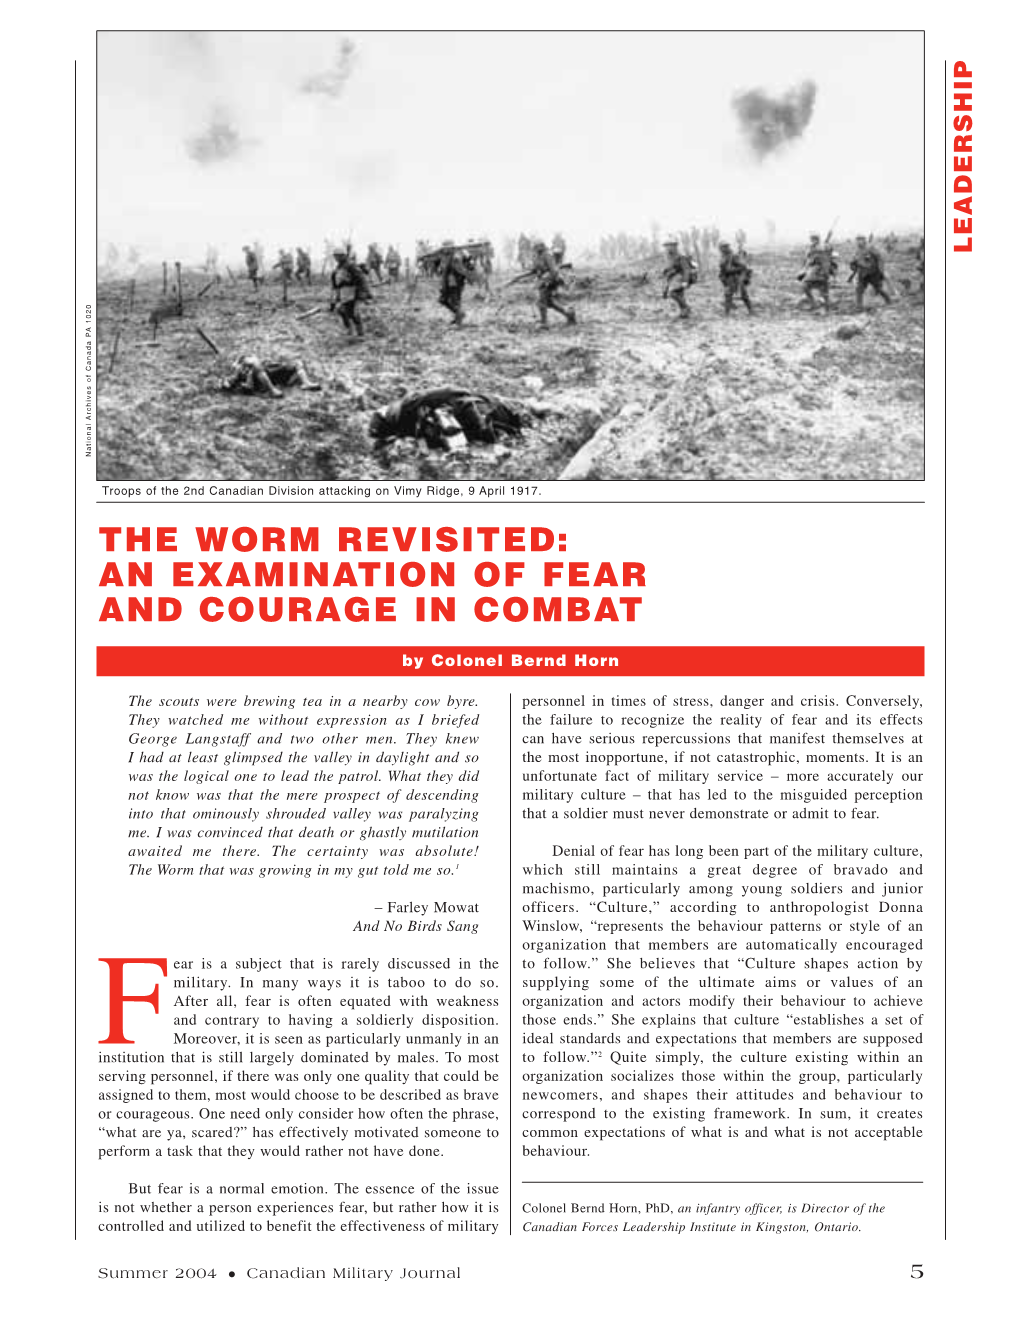 An Examination of Fear and Courage in Combat